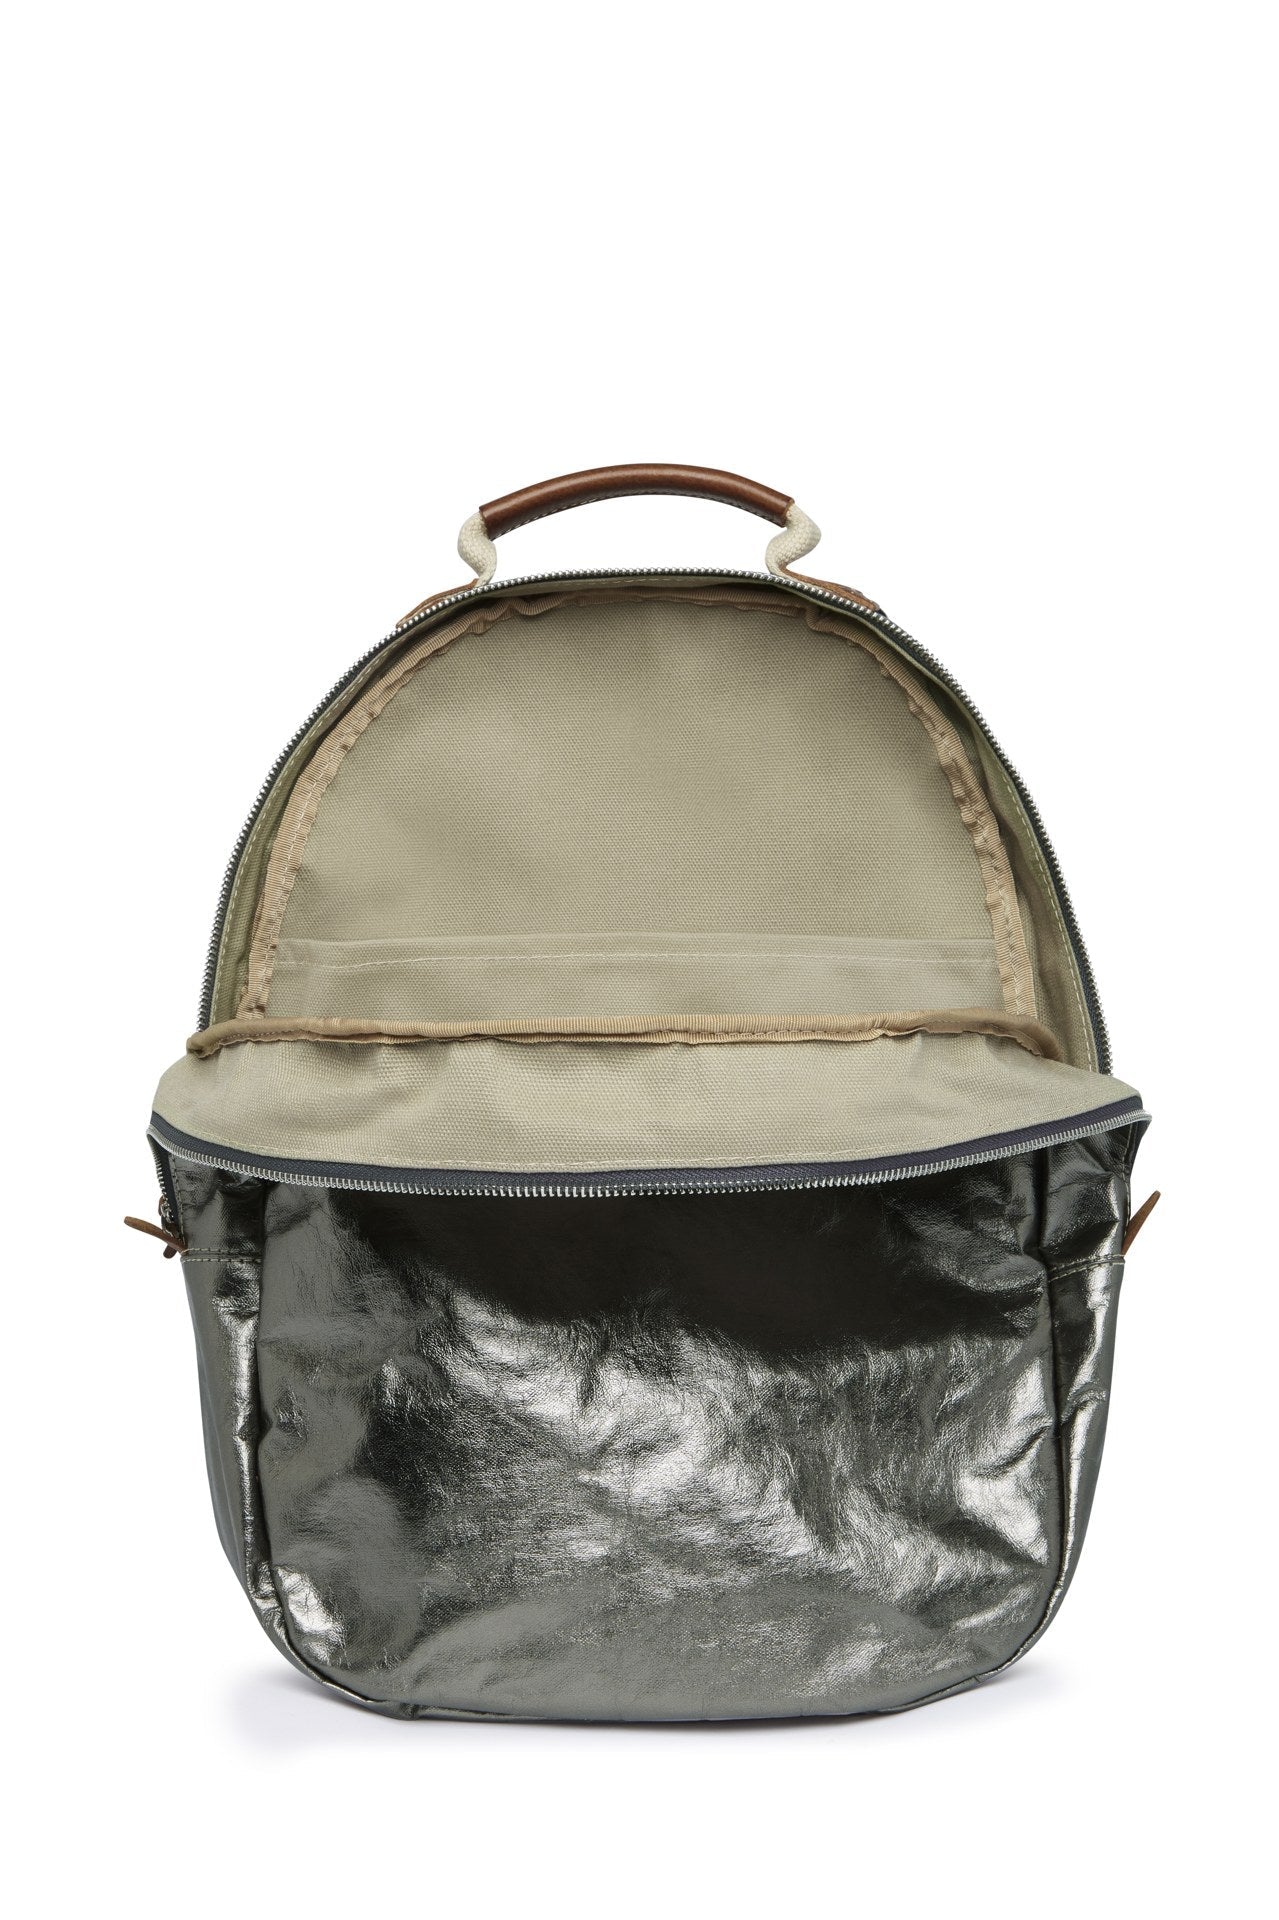 A washable paper oval shaped backpack is shown from the front angle, unzipped and open. It reveals two inner pockets in a cotton lining. The backpack is metallic pewter in colour.